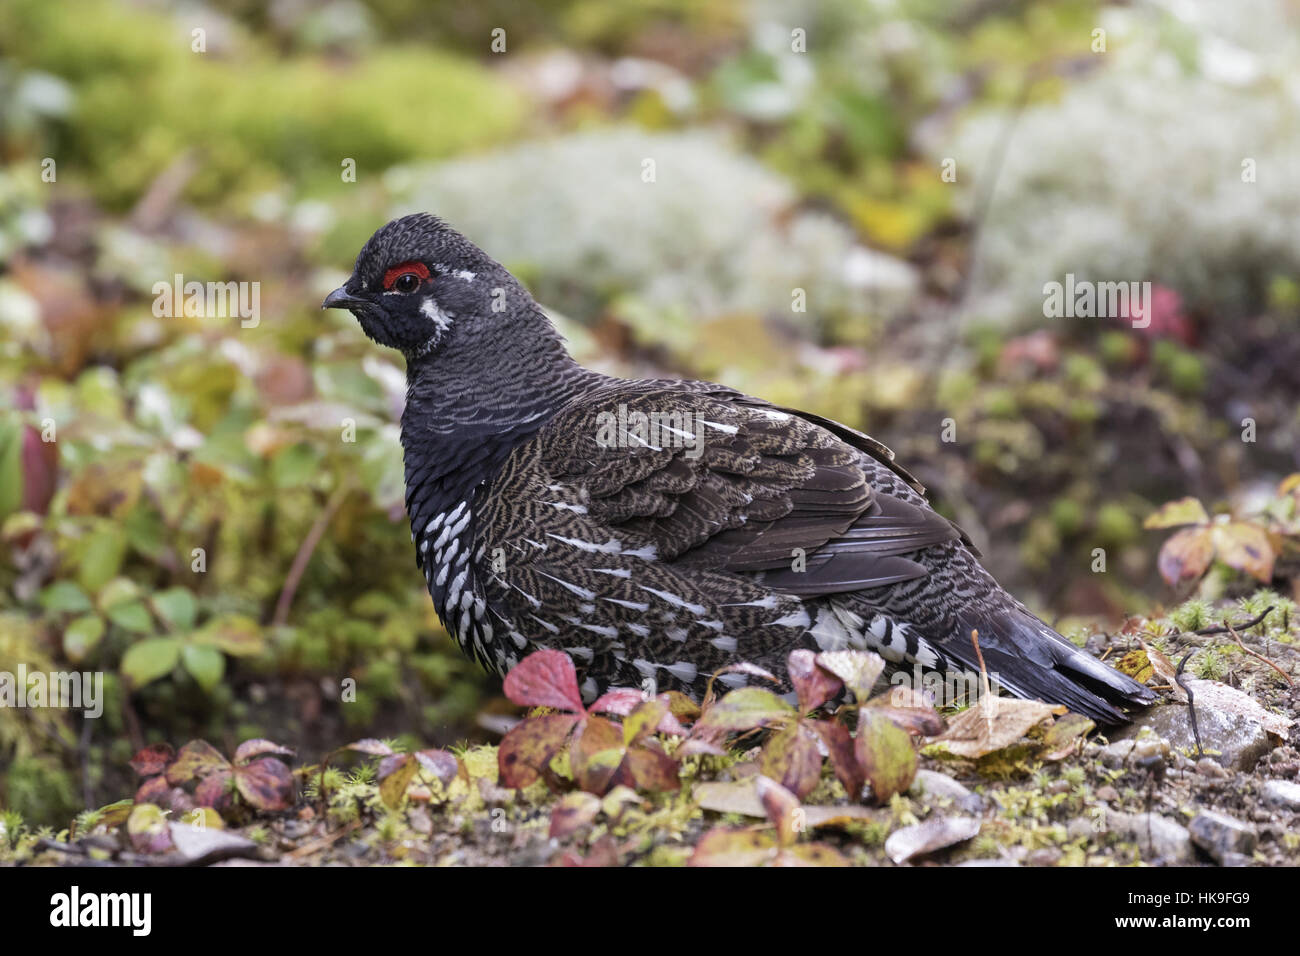 Spruce grouse (Falcipennis canadensis), adult male on the forest ground, Jacques-Cartier National Park, province Quebec, Canada, October Stock Photo